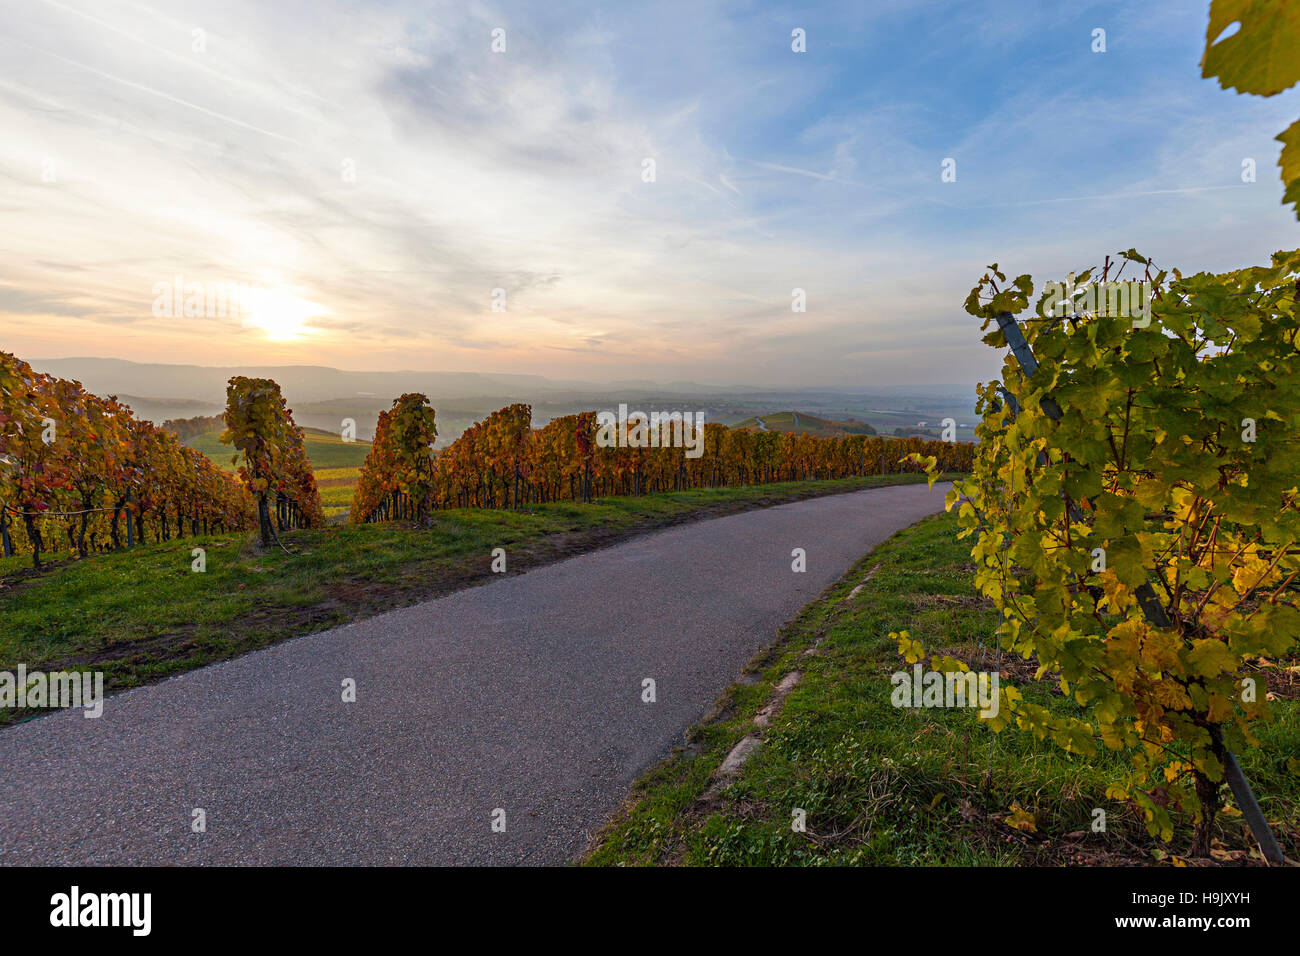 Germany, Baden-Wuerttemberg, Michelbach, vineyards in the evening Stock Photo